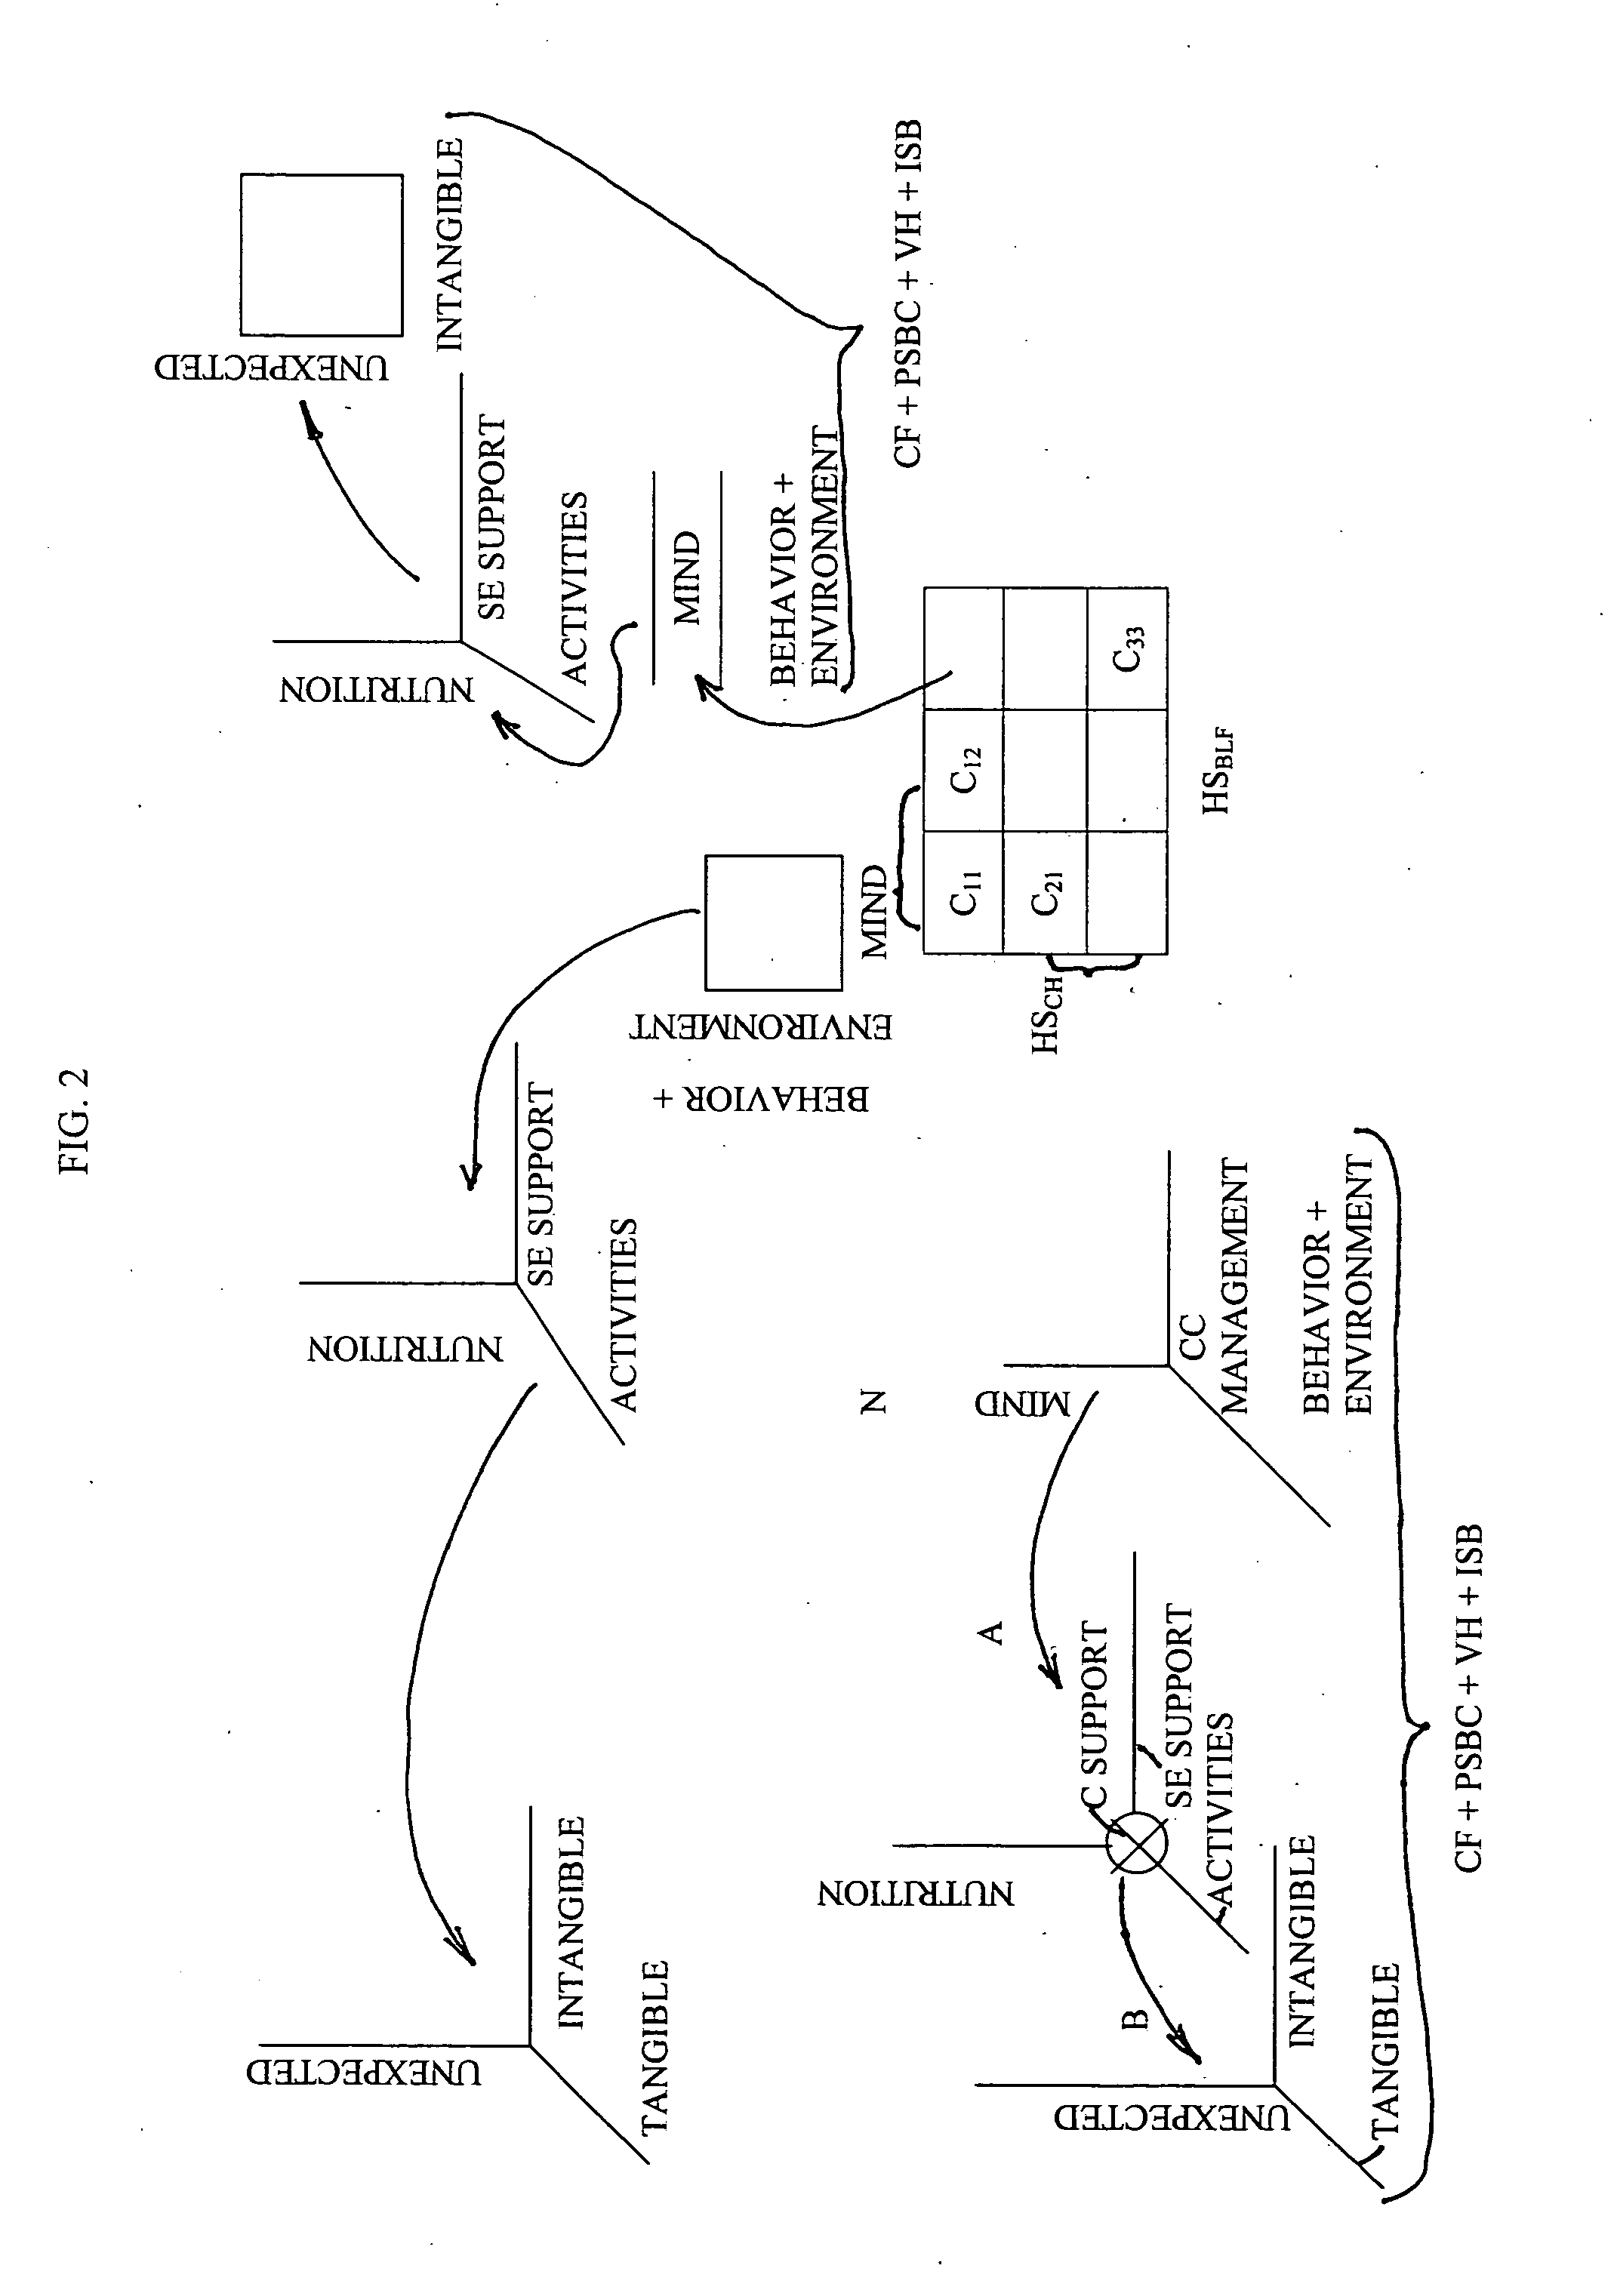 System and method for providing individually tailored health-promoting information